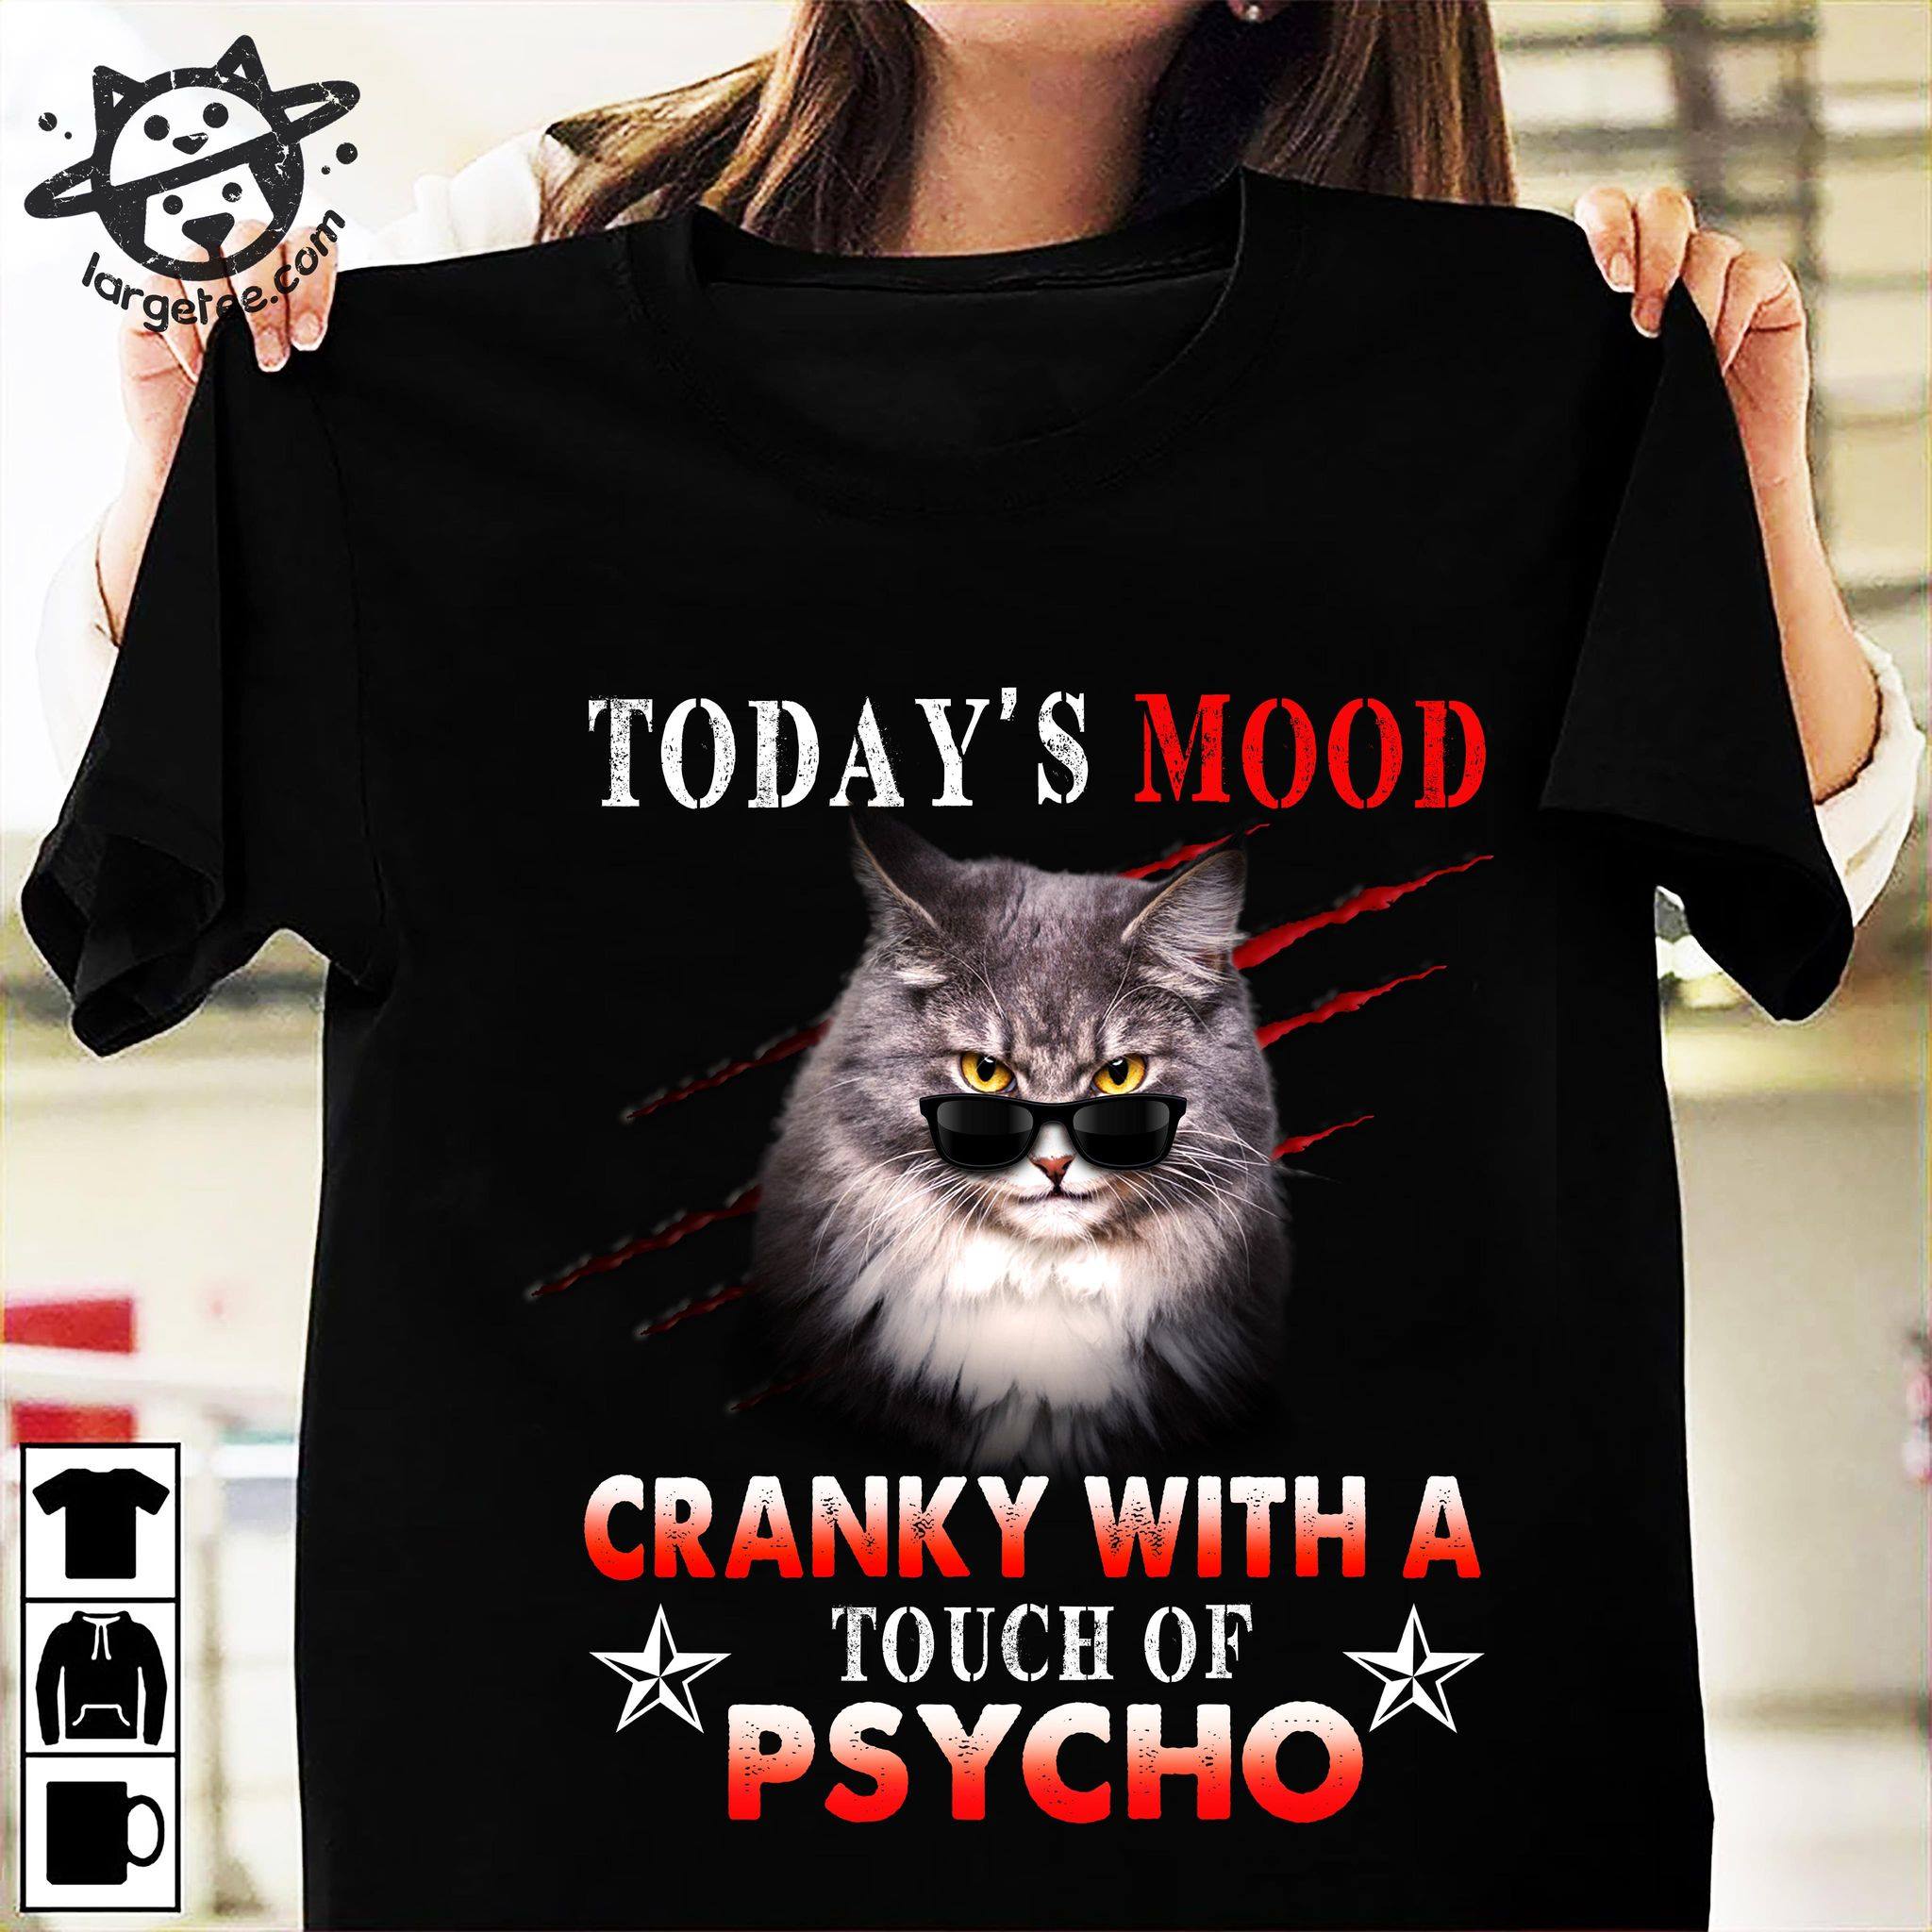 Today's mood cranky with a touch of psycho - Gangster cat